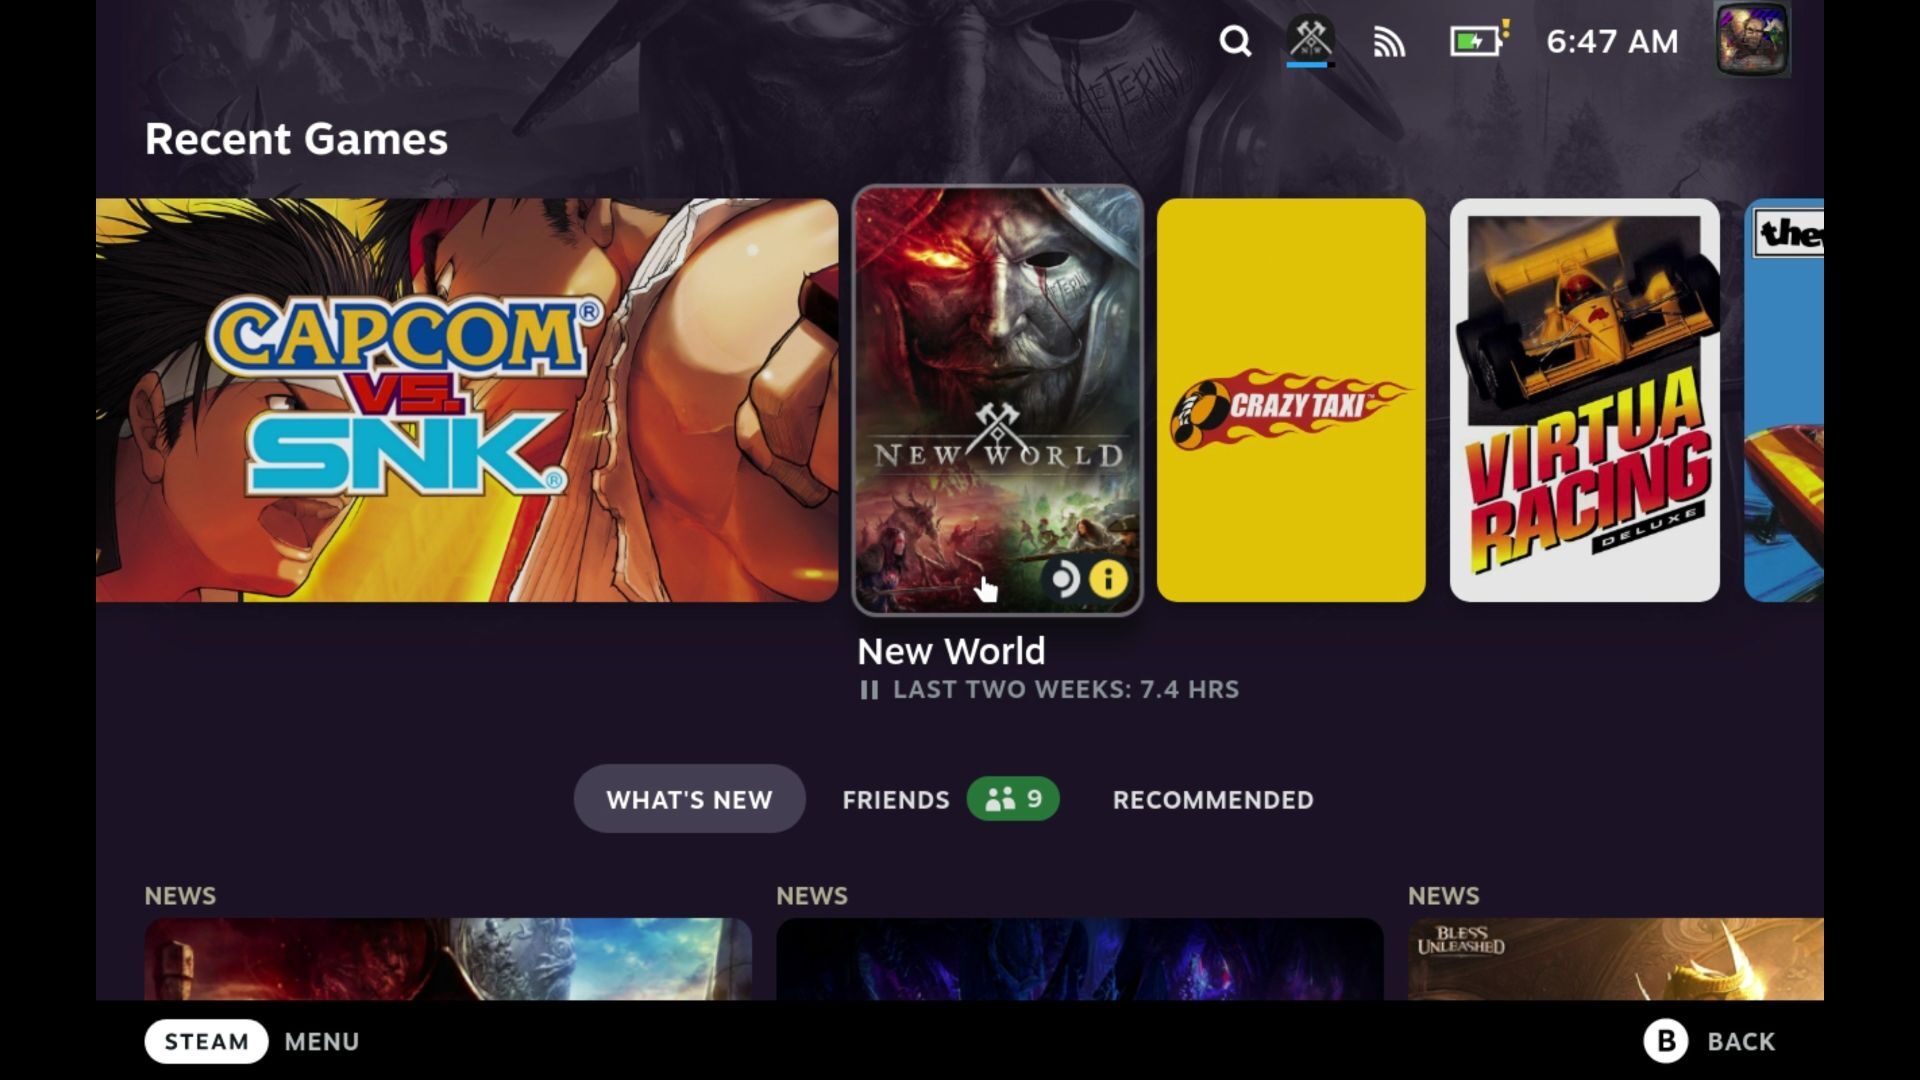 Steam Deck Verified Games Have Started Appearing Alongside A Photo Of God  Of War Running On The Console